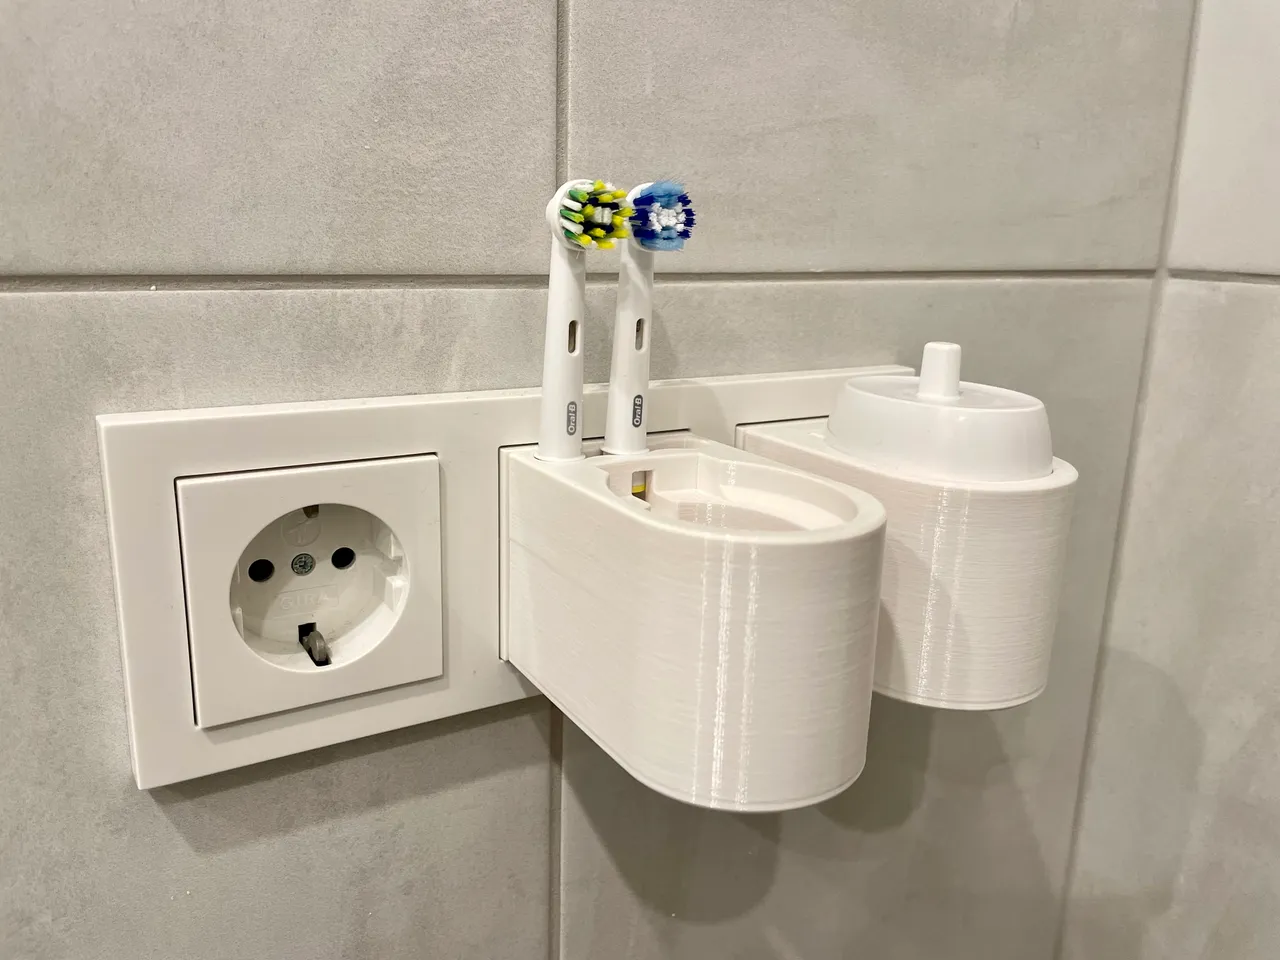 Electric Oral-B Tooth Brush Wall/Outlet Holder/Mount